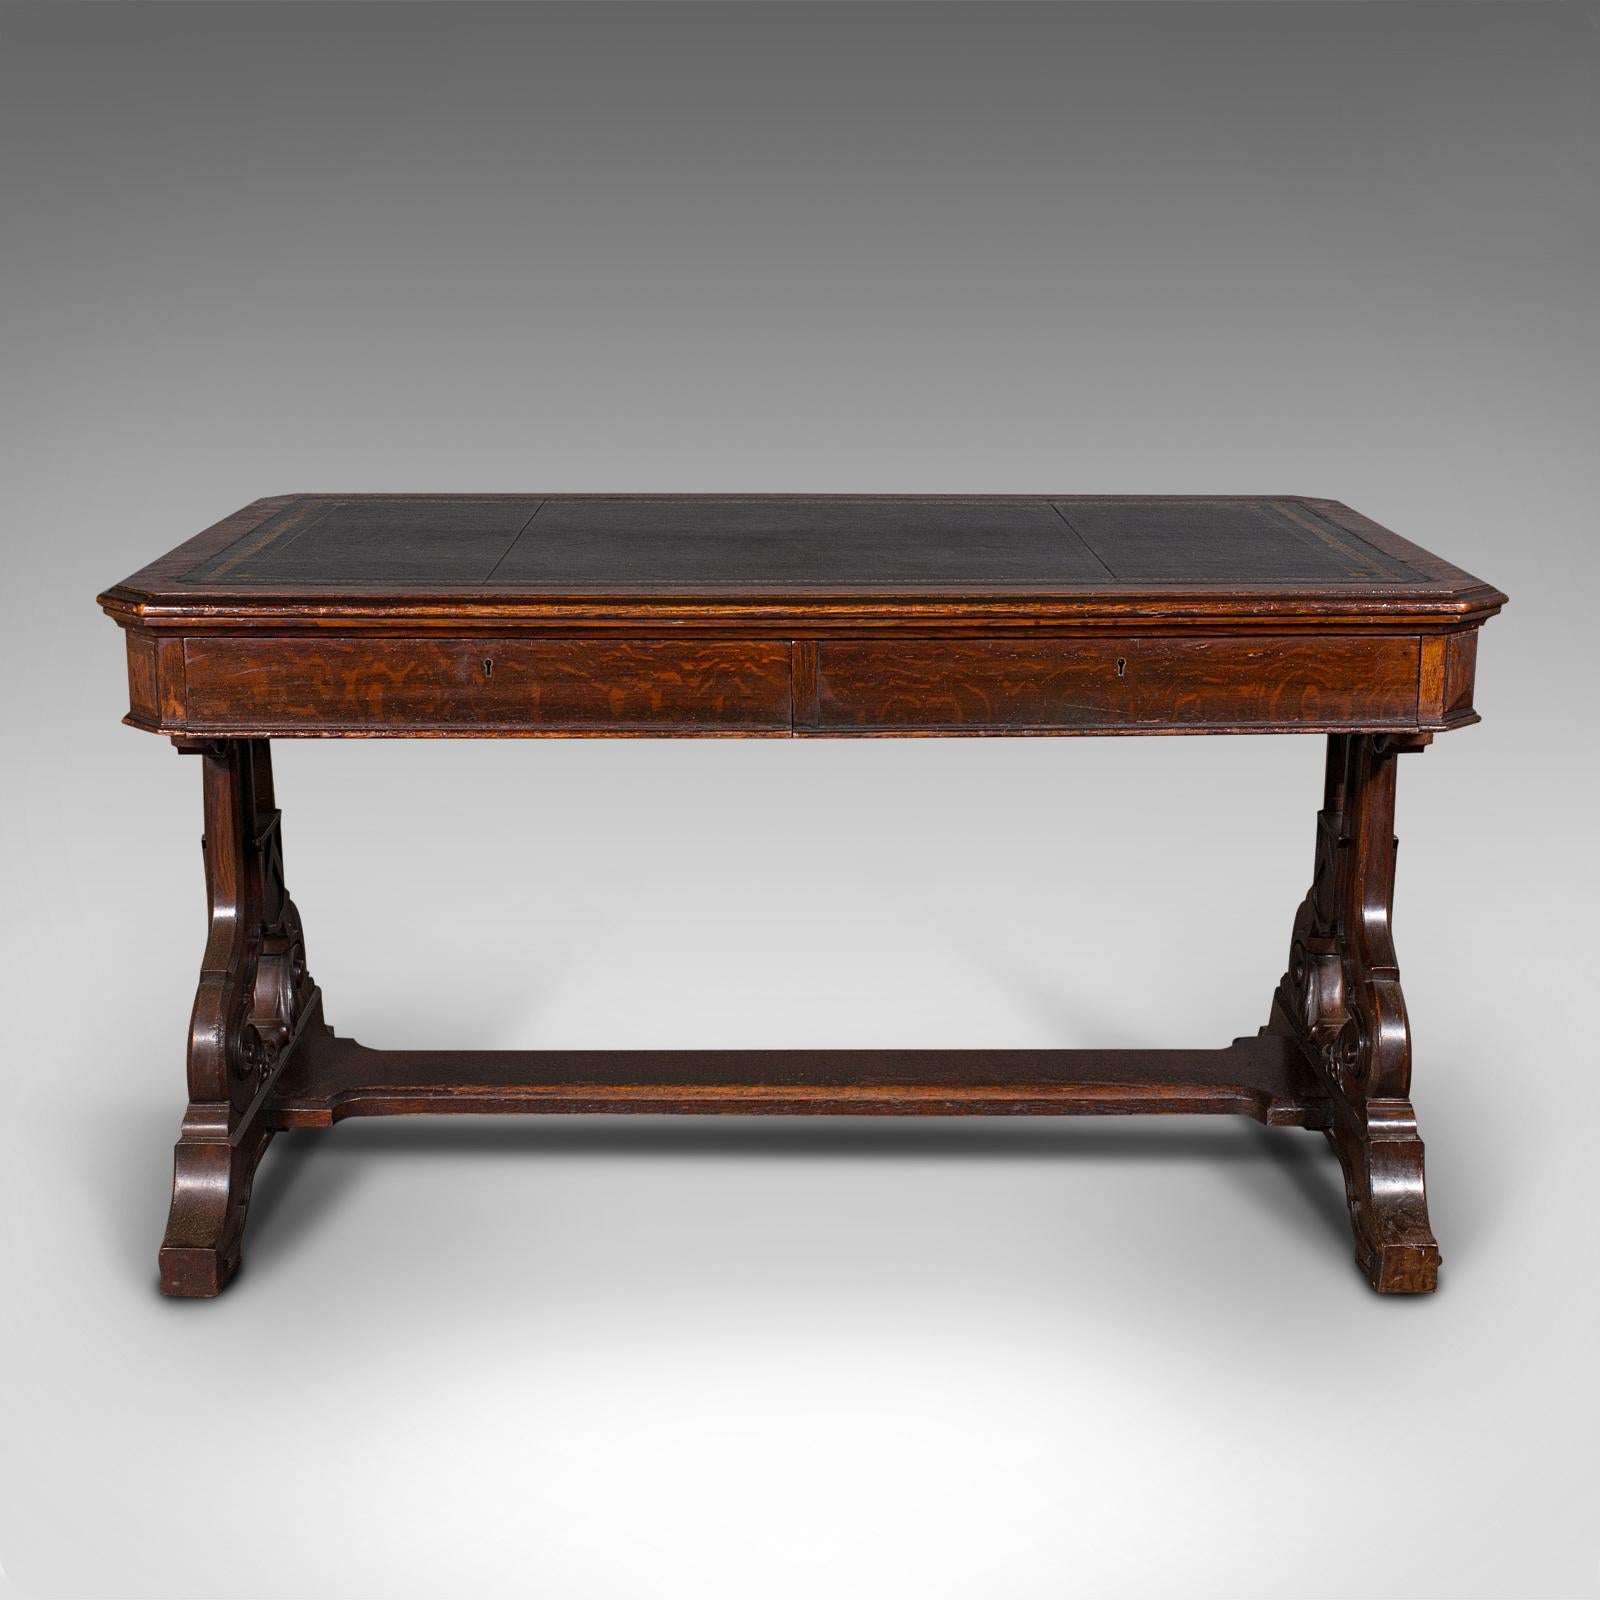 This is an antique estate desk. A Scottish, oak library table with leather skiver in Gothic revival taste, dating to the Victorian period, circa 1880.

Wonderfully stout, and fascinatingly finished desk
Displays a desirable aged patina and in